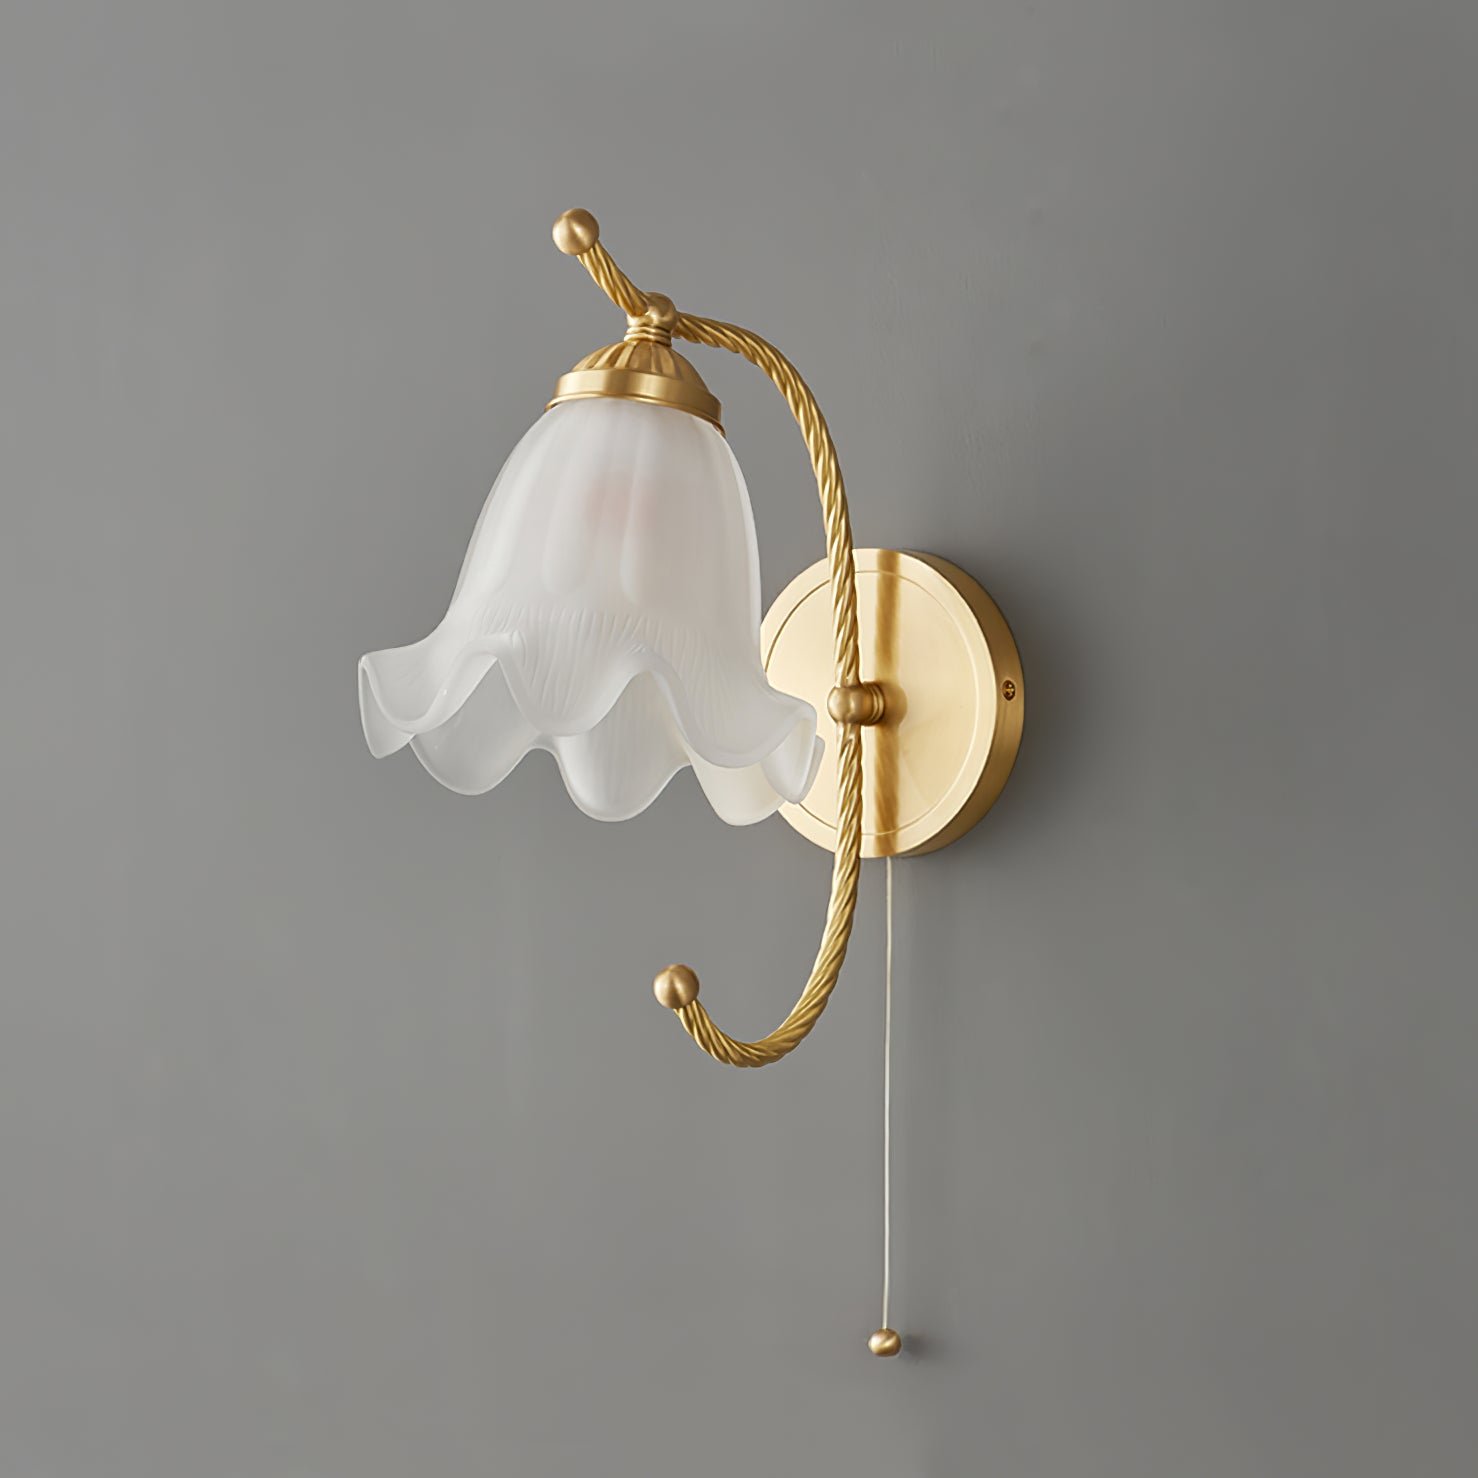 2-Pack of Brass and Opaque Glass Curved Gooseneck Sconces